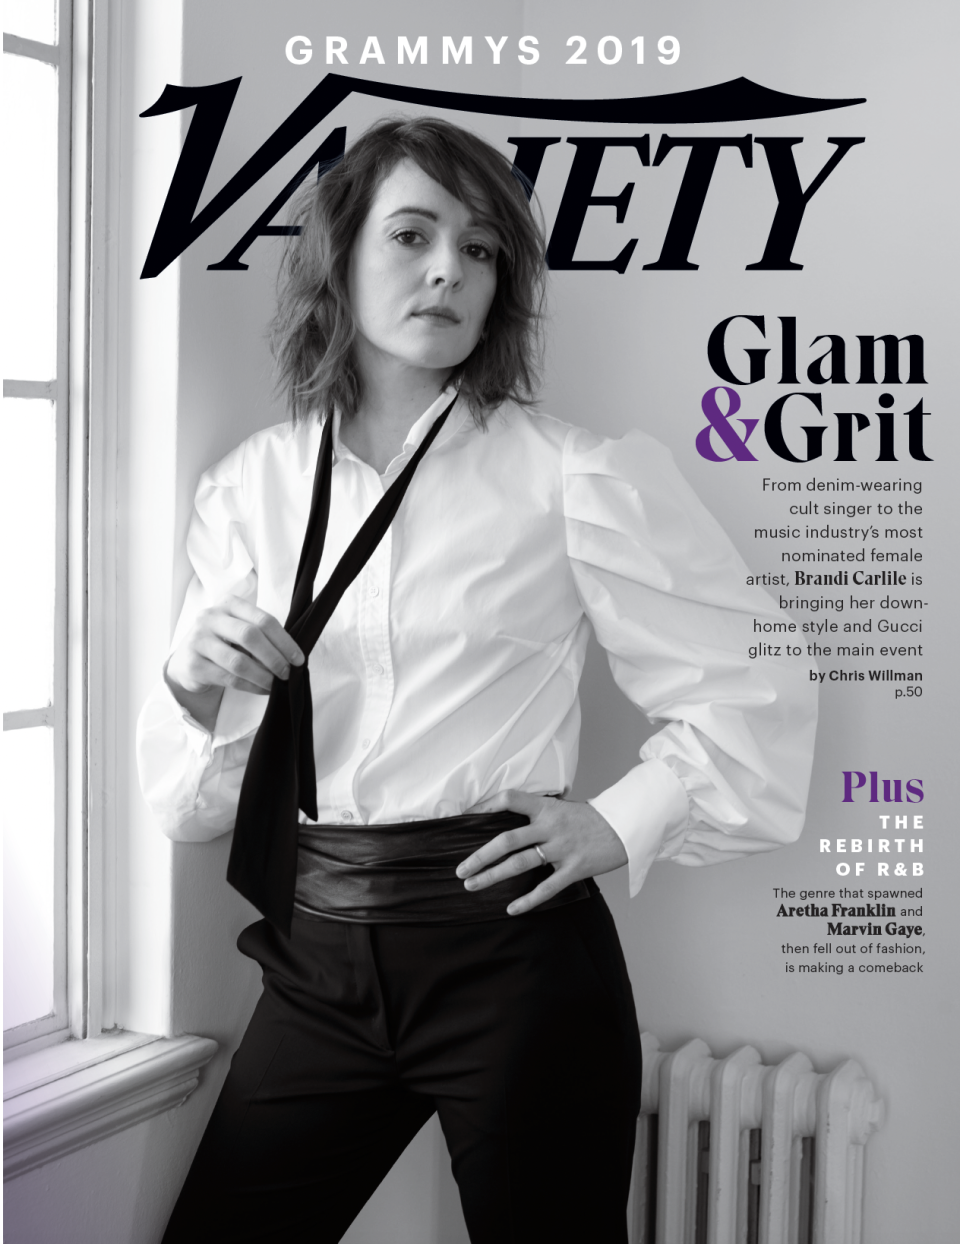 Brandi Carlile on the cover of Variety’s Grammys issue in 2019, her first solo magazine cover